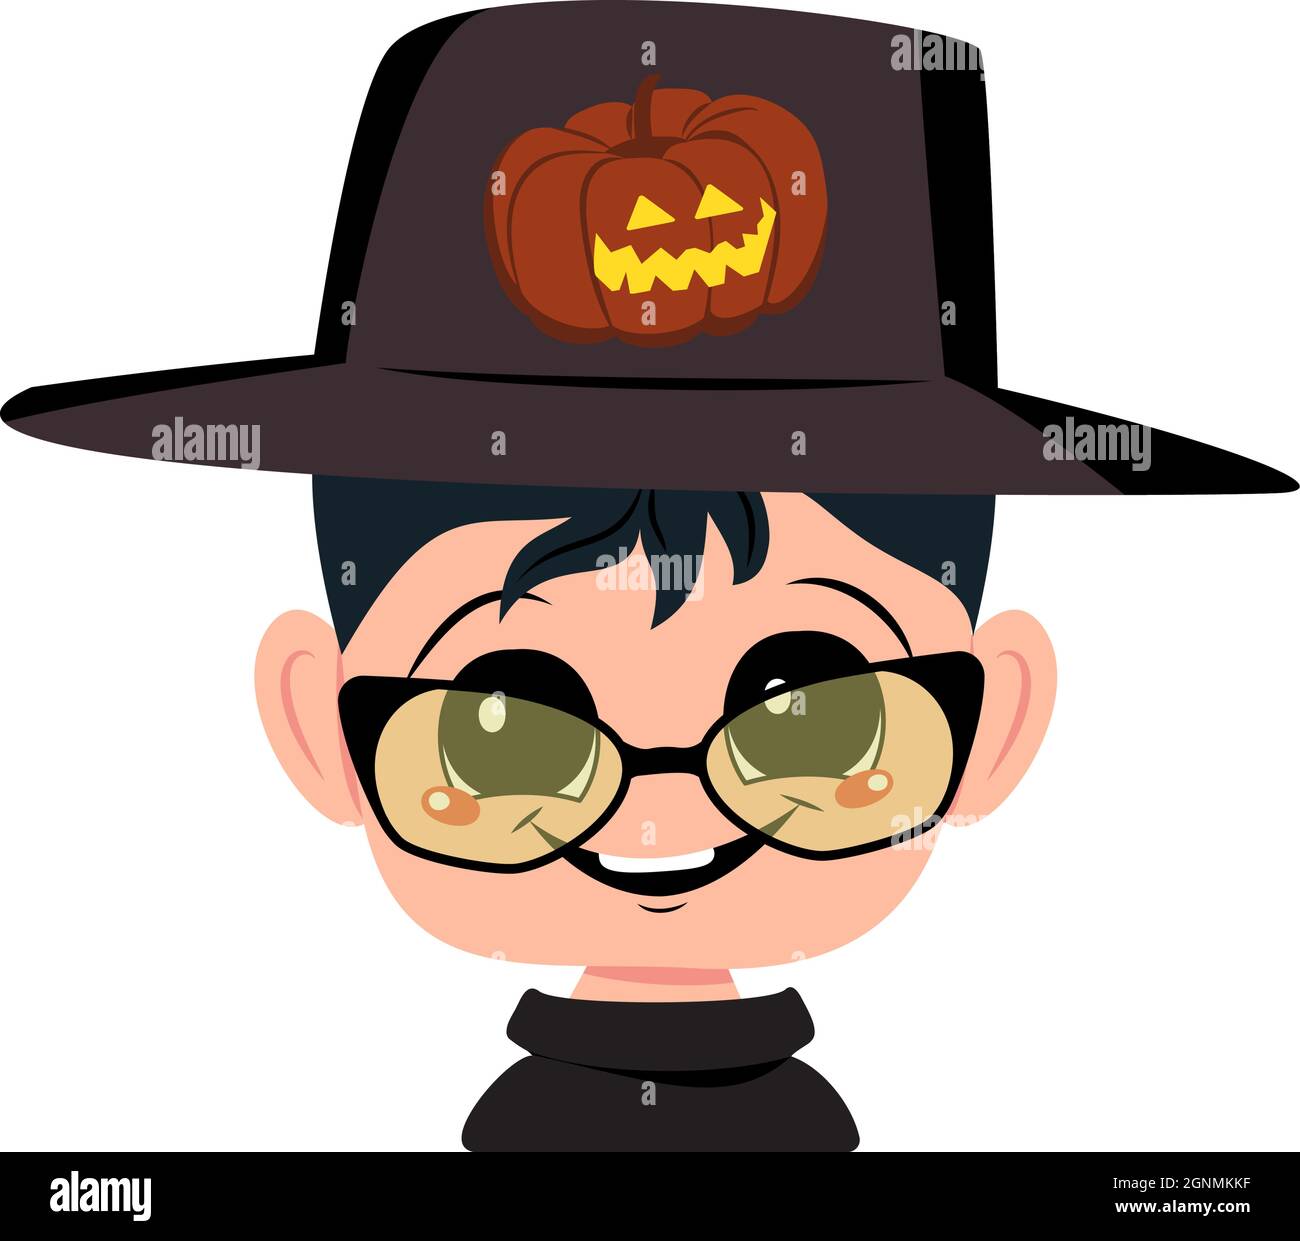 Boy with dark hair, big eyes and a wide happy smile in hat with pumpkin. Head of child with joyful face and glasses. Halloween party decoration Stock Vector